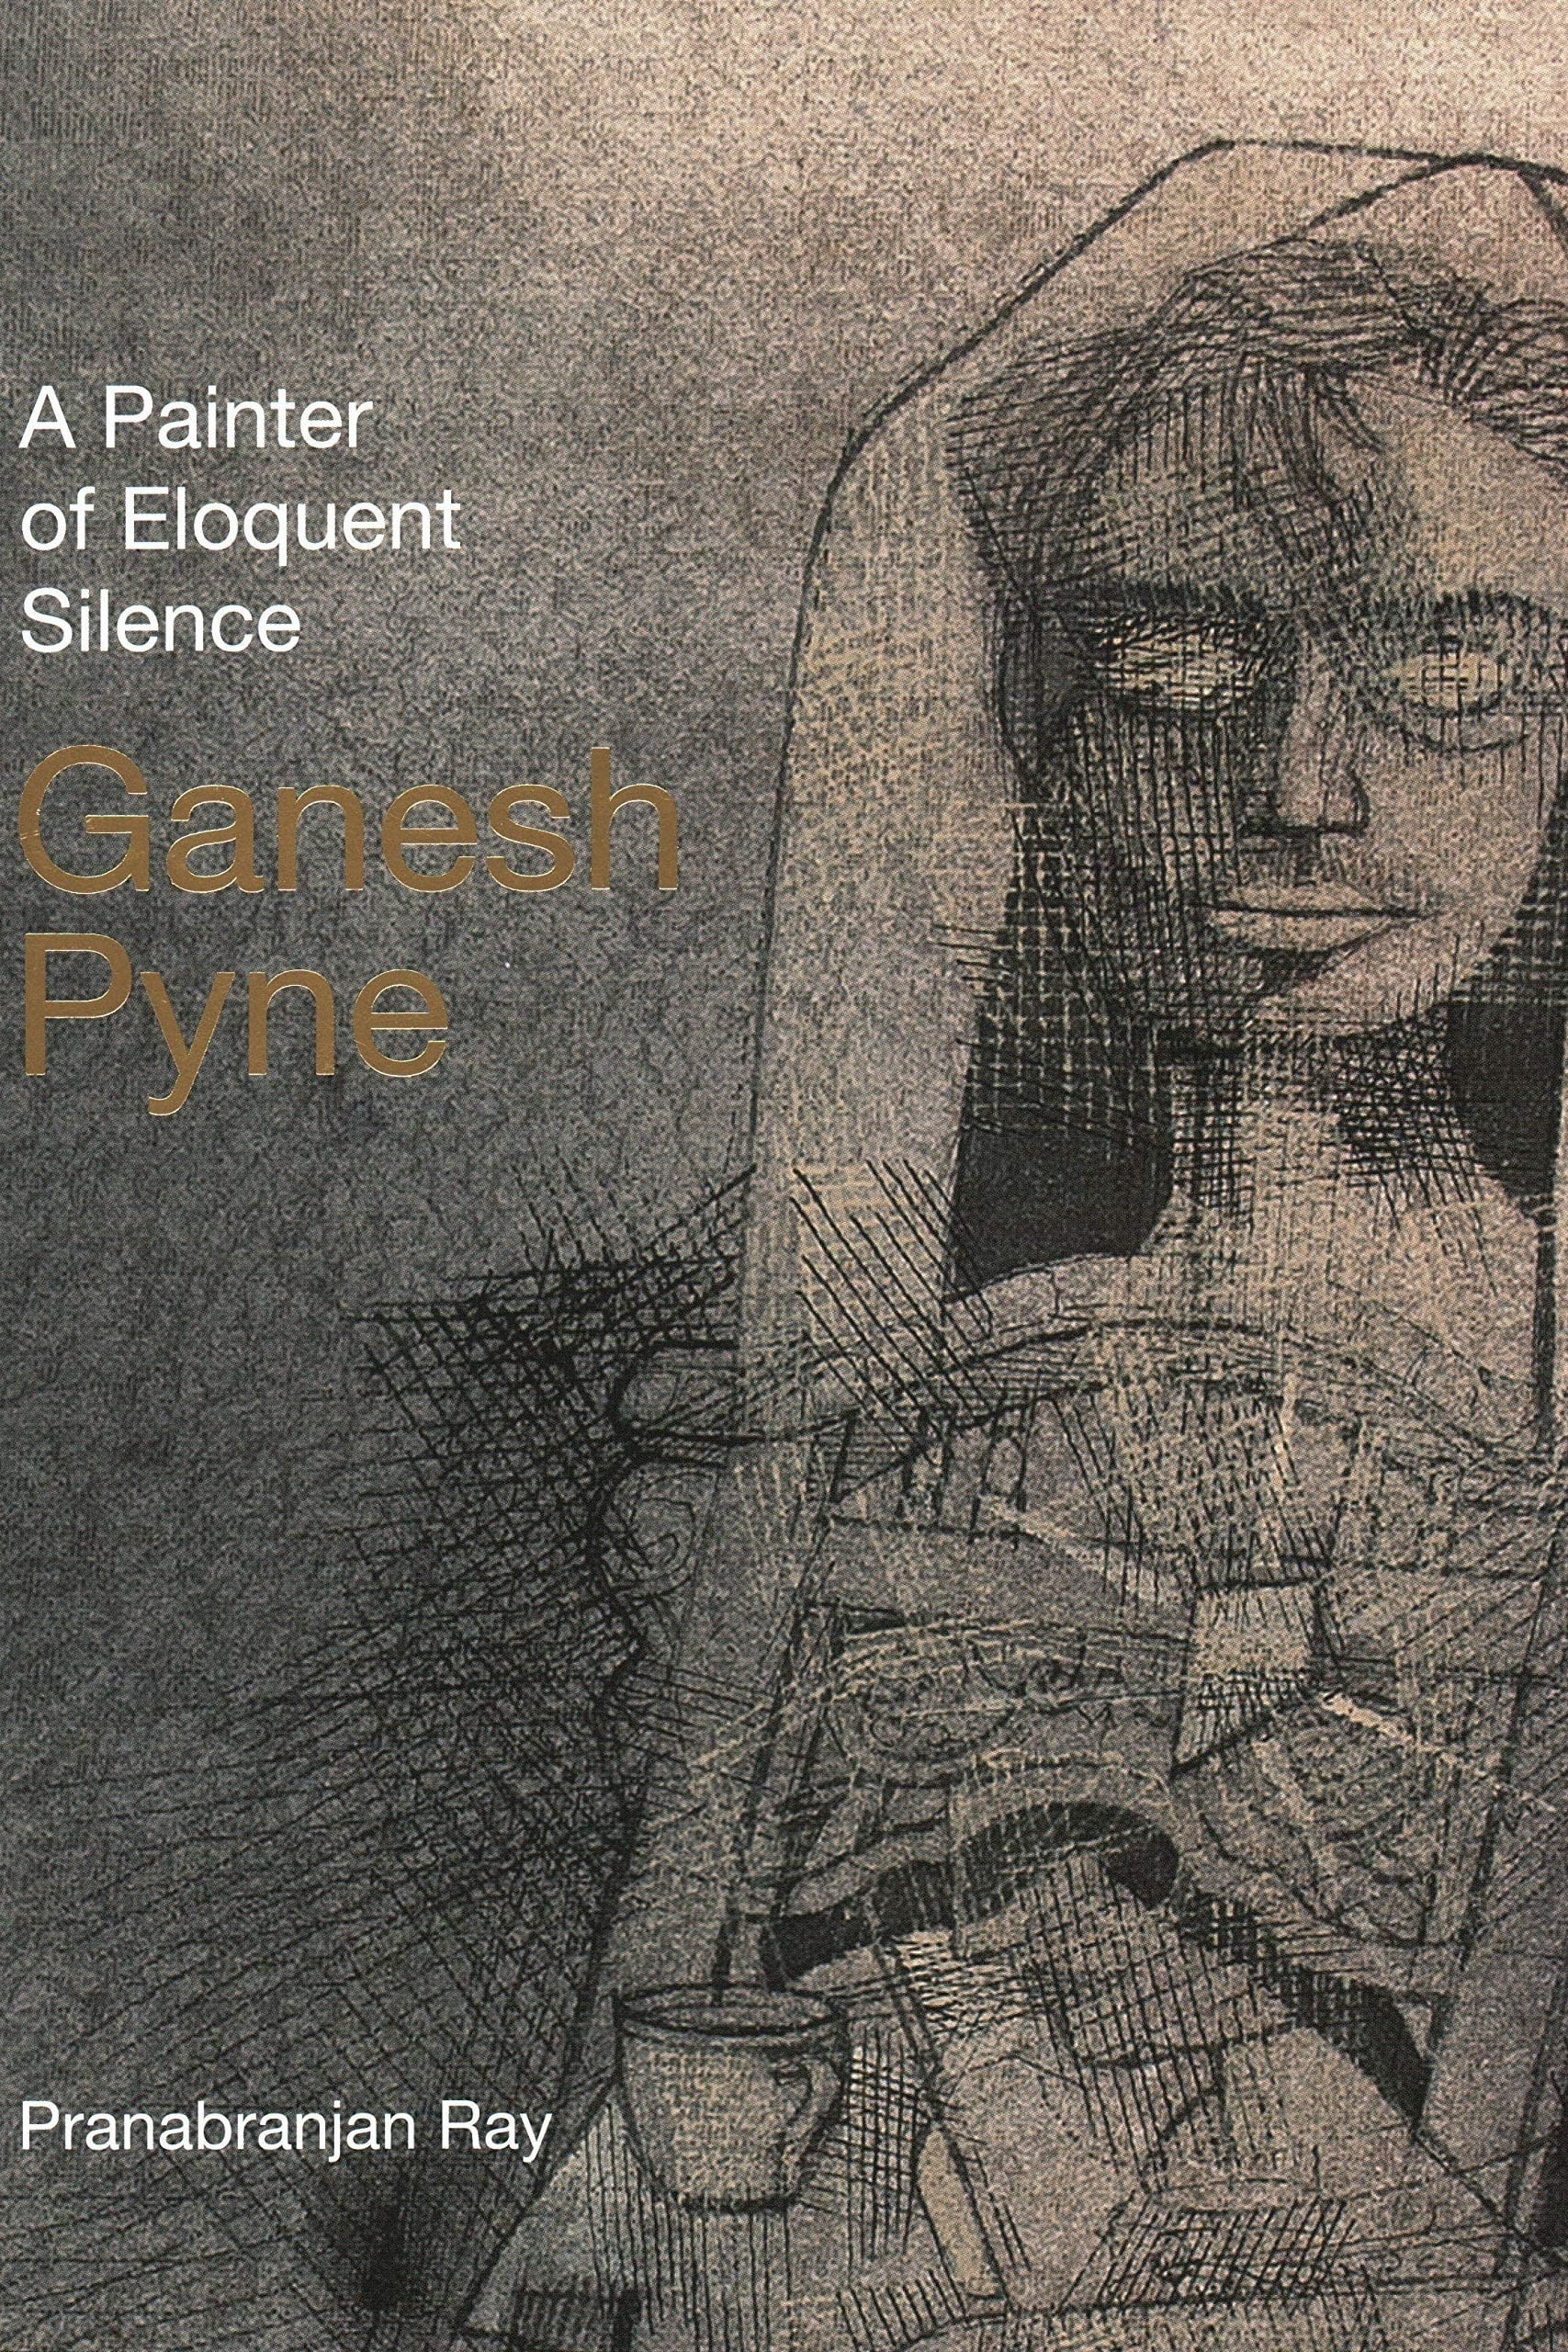 A Painter of Eloquent Silence: Ganesh Pyne